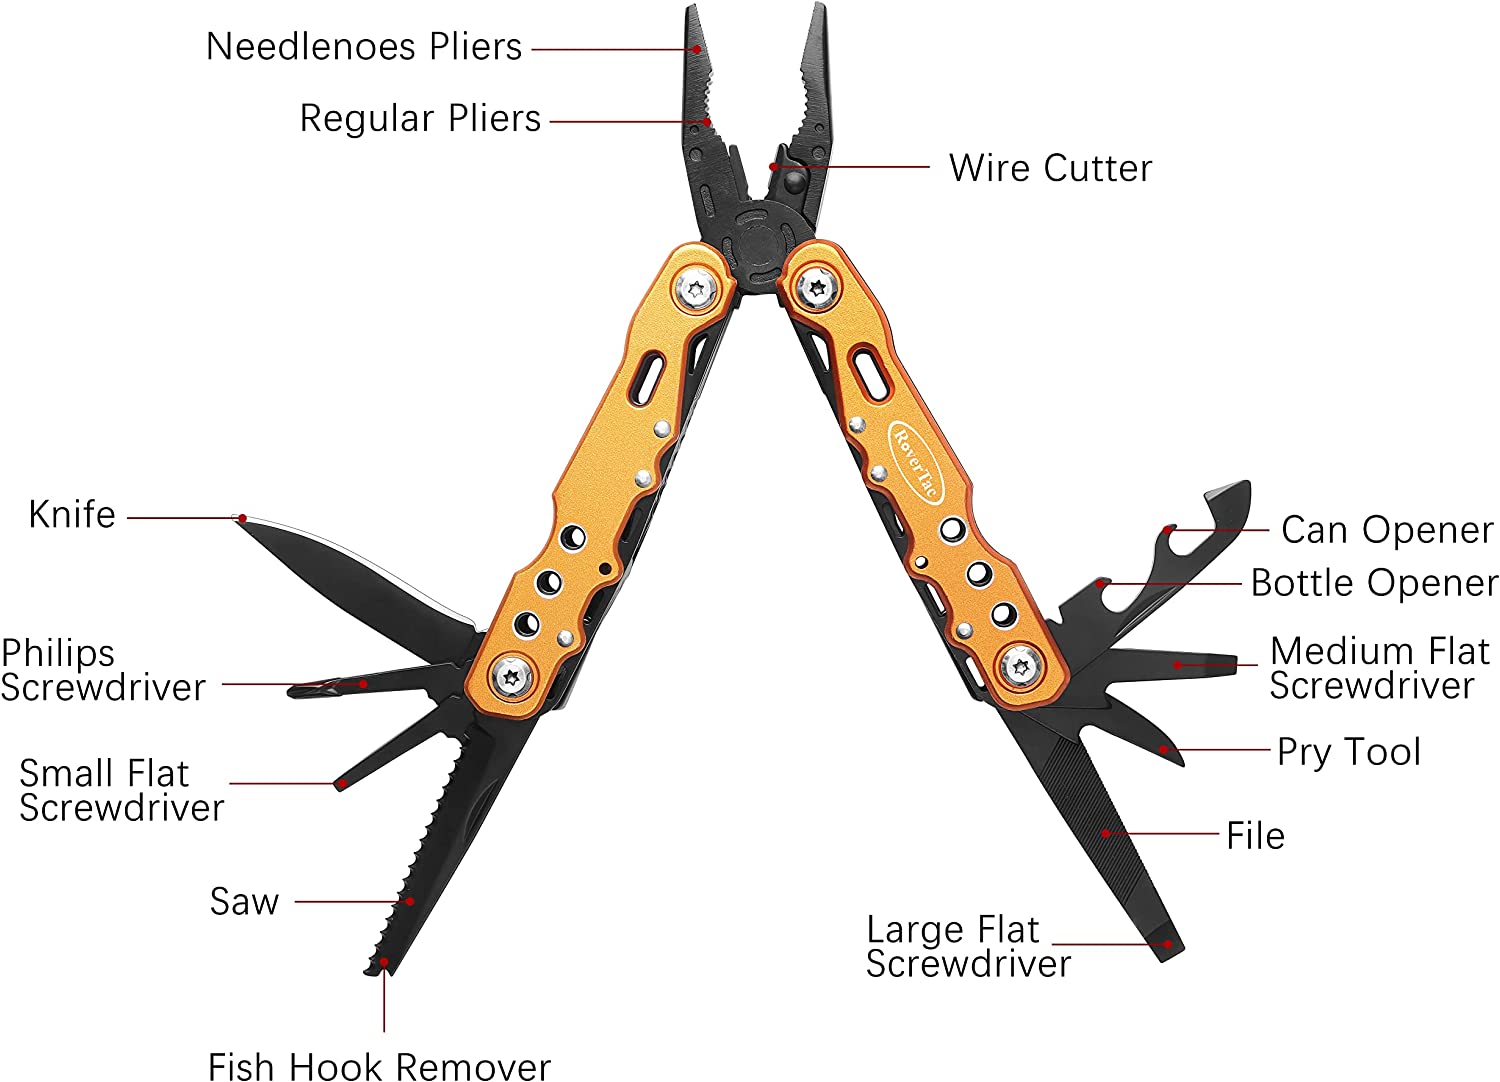 Gifts for Dad Husband Boyfriend Gifts for Him Unique Birthday Gifts for Men RoverTac 14 in 1 Multitool Pocket Knife Pliers Screwdrivers Saw Bottle Opener Perfect for Camping Survival Hiking Repairs